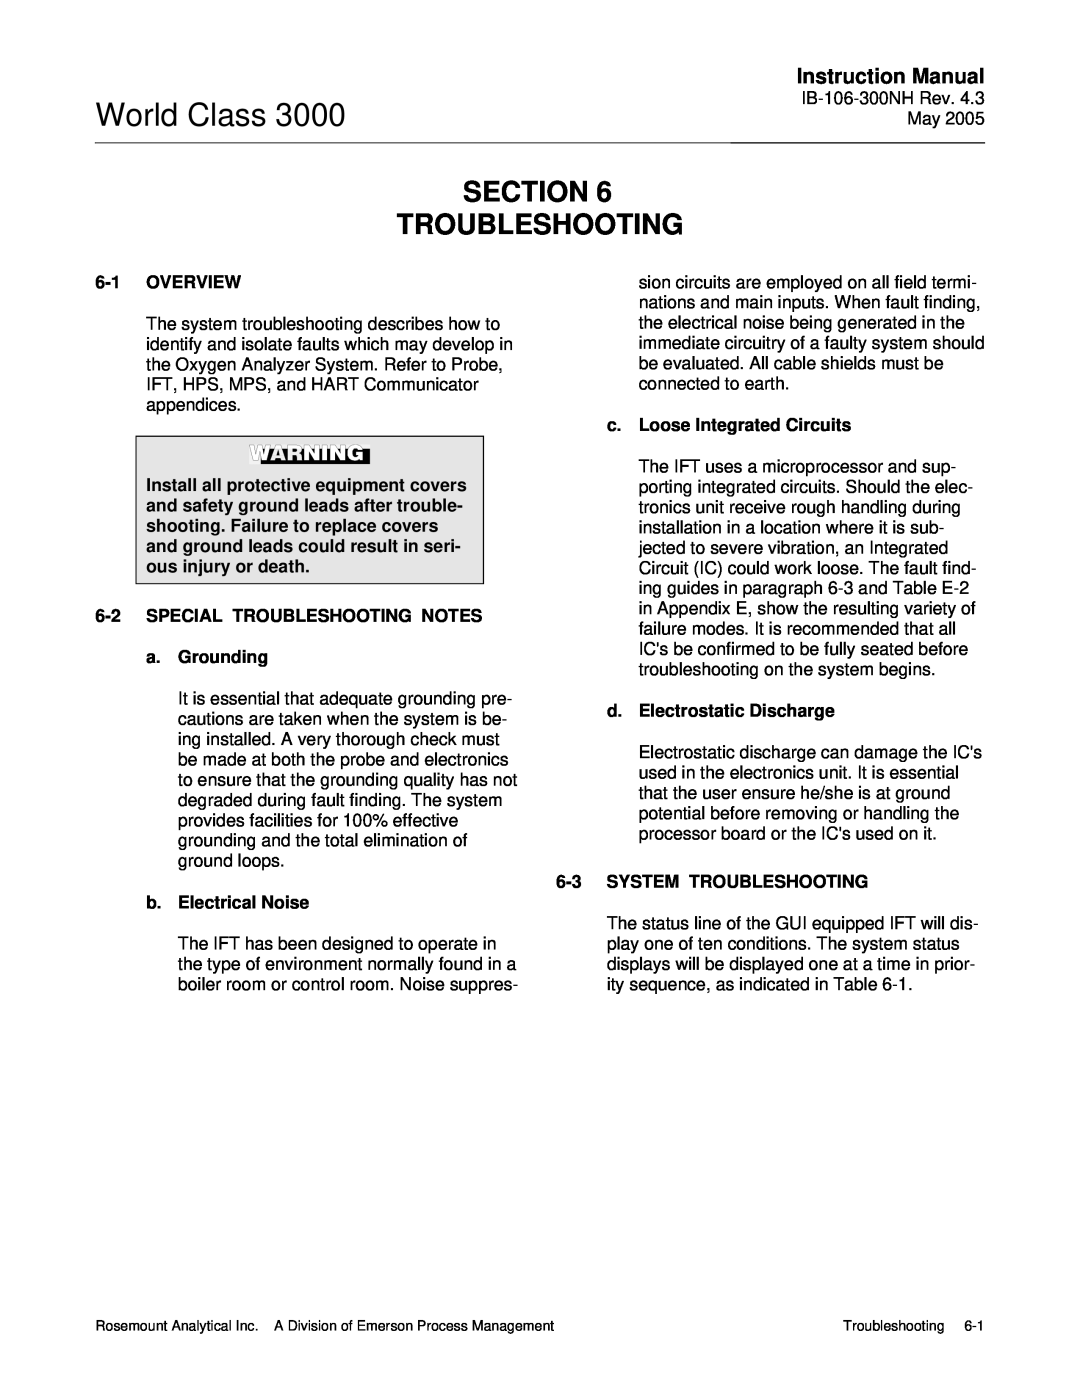 Emerson 3000 Section Troubleshooting, World Class, 6-1OVERVIEW, 6-2SPECIAL TROUBLESHOOTING NOTES a.Grounding 